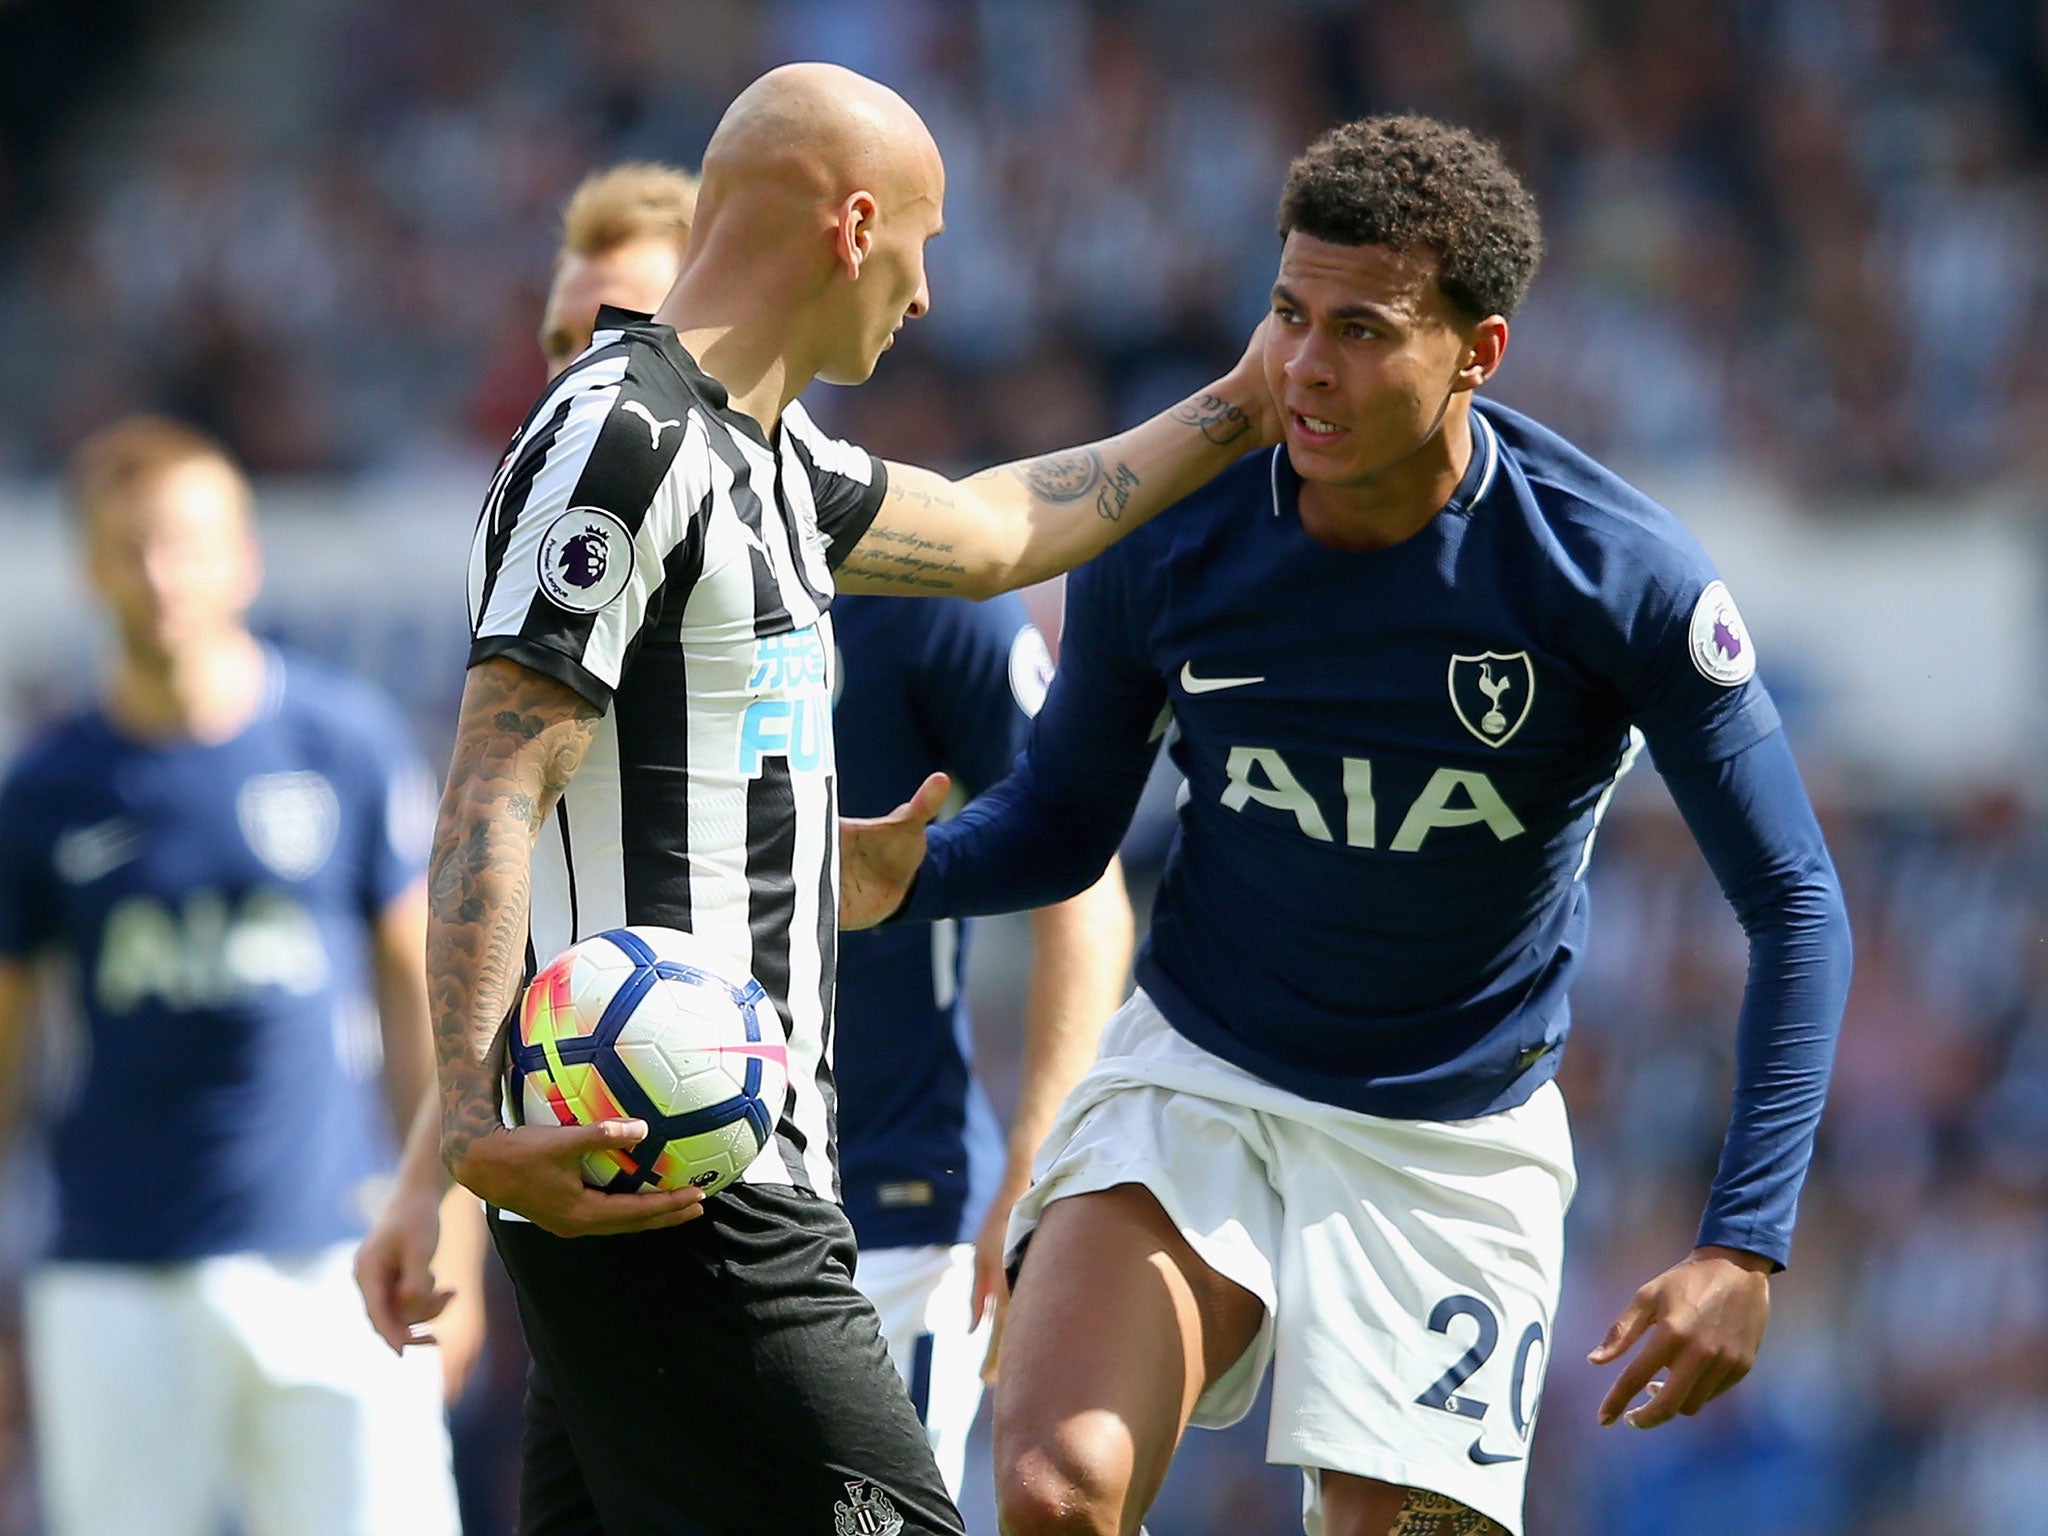 Shelvey looked bemused as to why he was sent-off but the stamp was a reckless decision